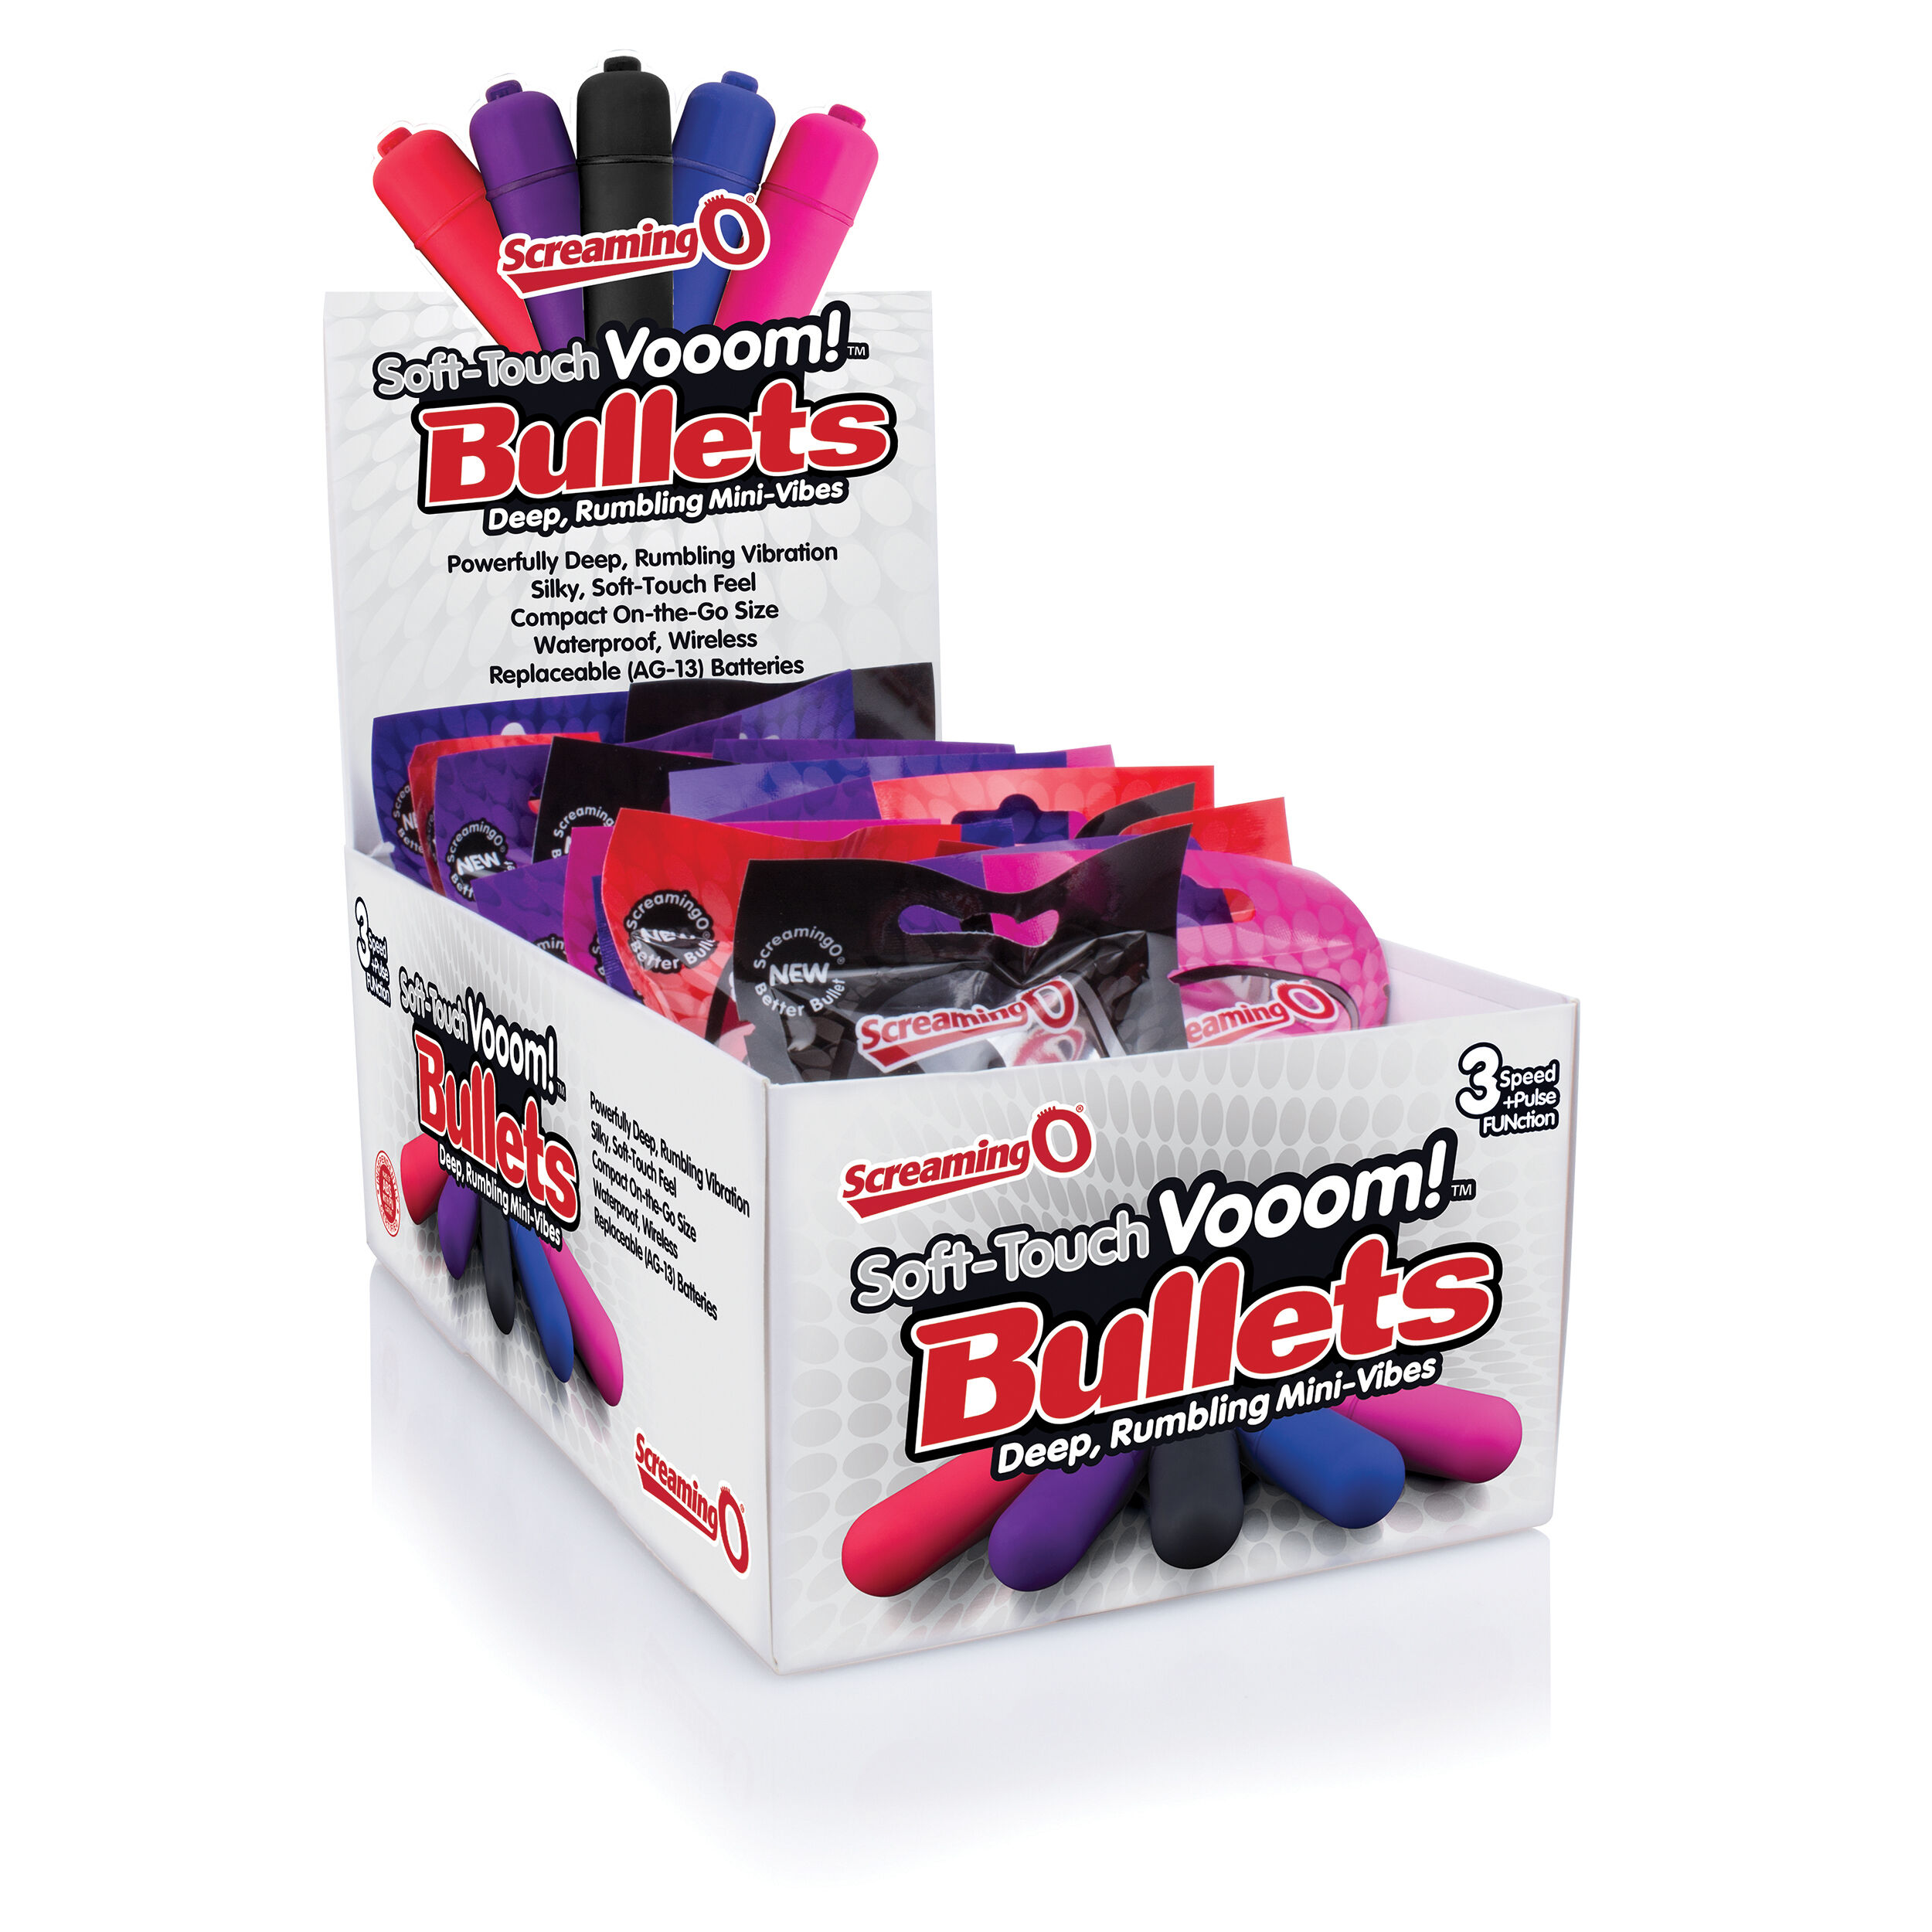 Bushman Products/The Screaming O Soft-Touch Vooom! Bullets - 20 Count Pop Box Display - Assorted Colors